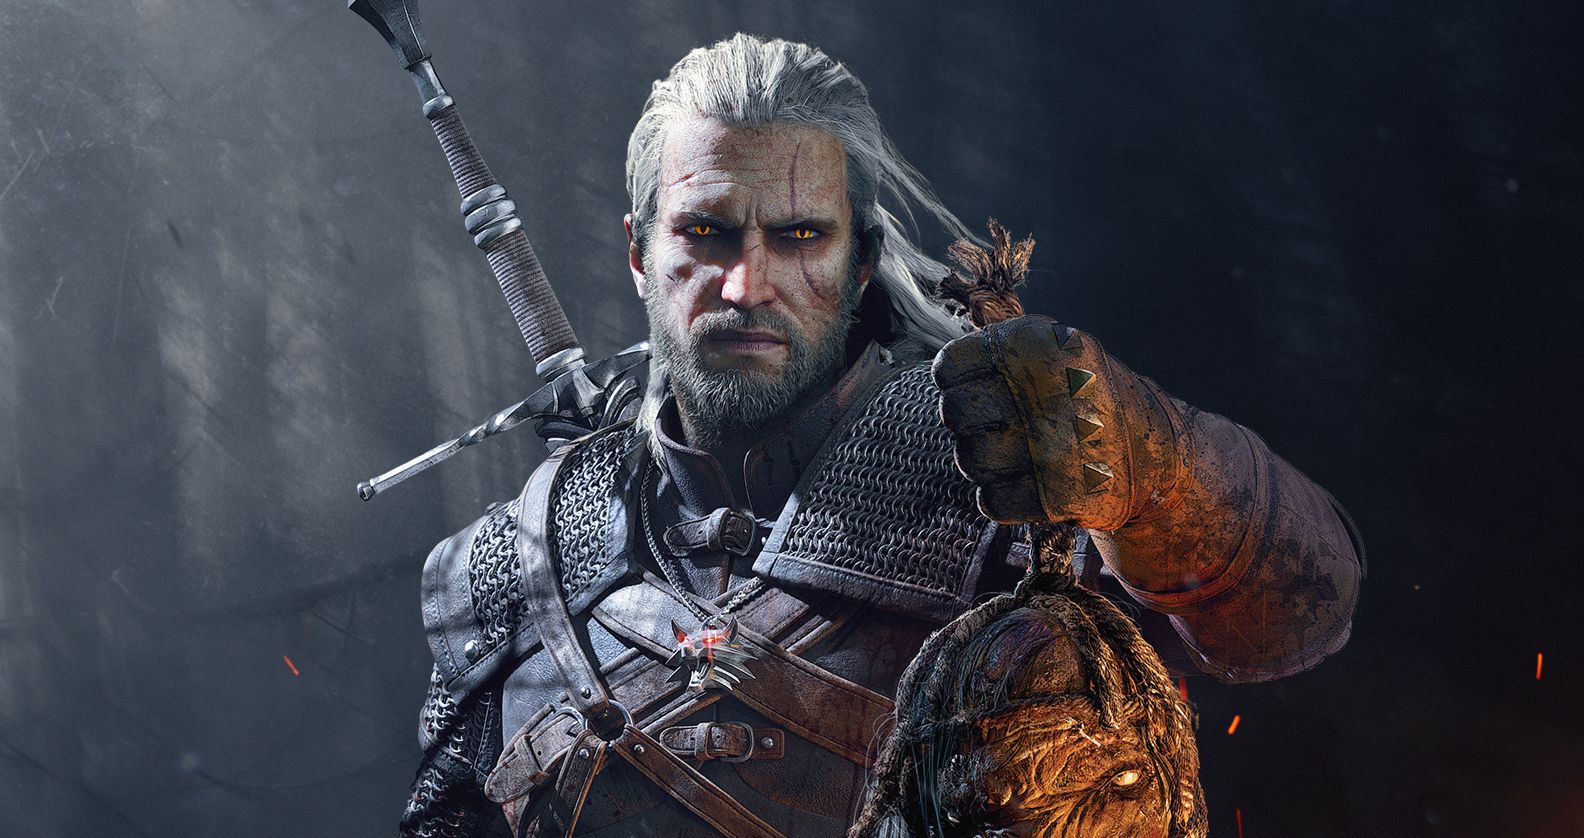 Image for The Witcher 3 coming to Xbox Games Pass according to video advert